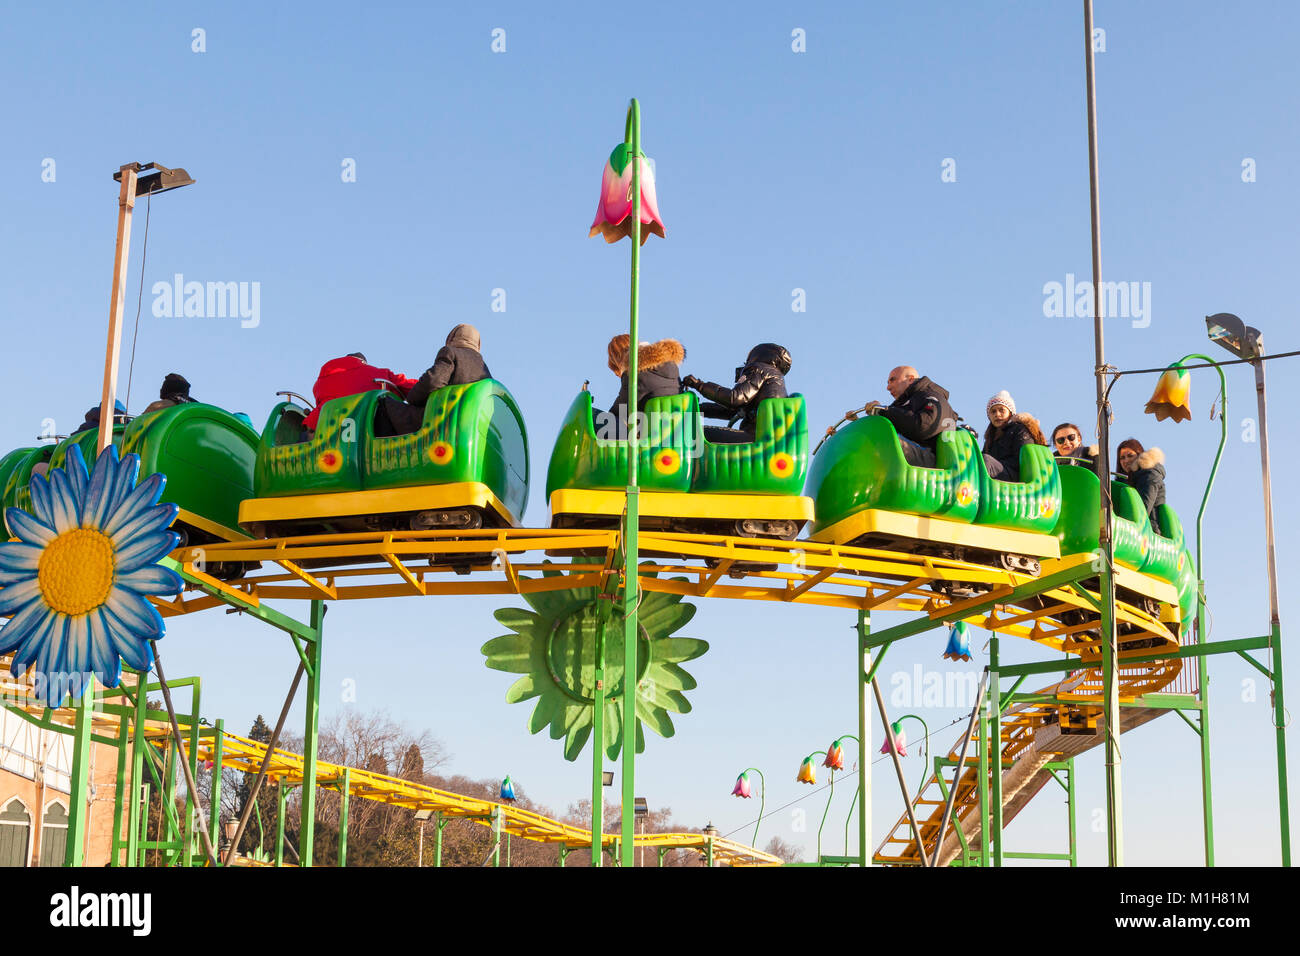 https://c8.alamy.com/comp/M1H81M/group-of-young-kids-with-their-parents-riding-on-a-wacky-worm-roller-M1H81M.jpg